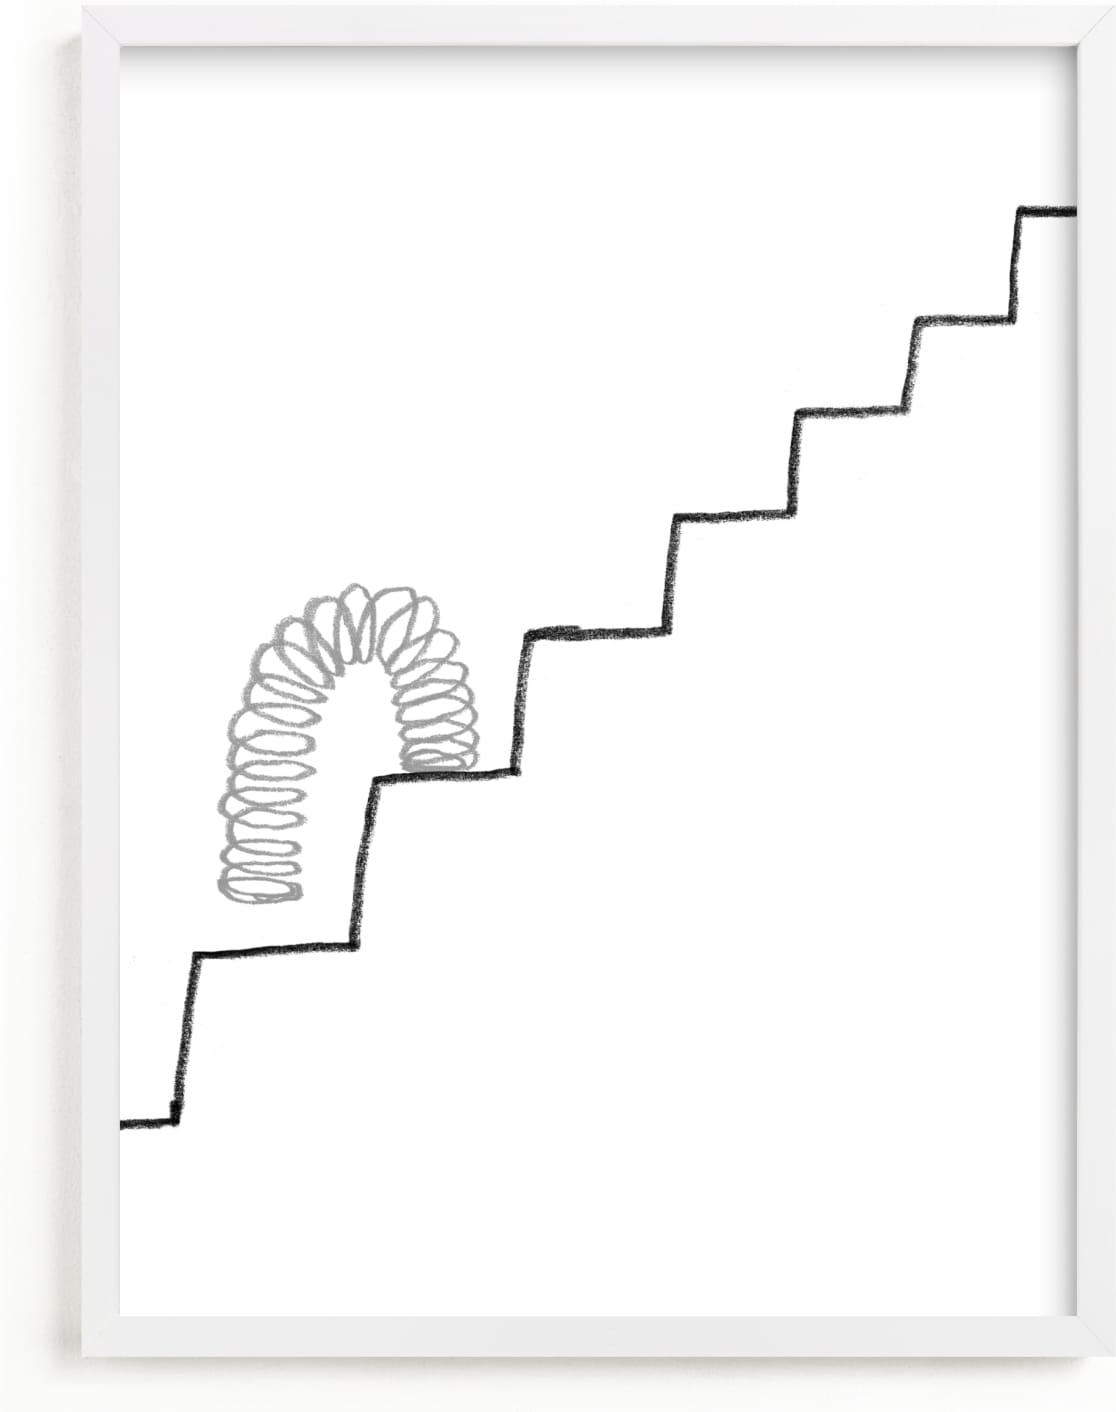 This is a black and white art by Elliot Stokes called Slinky on the Stairs.